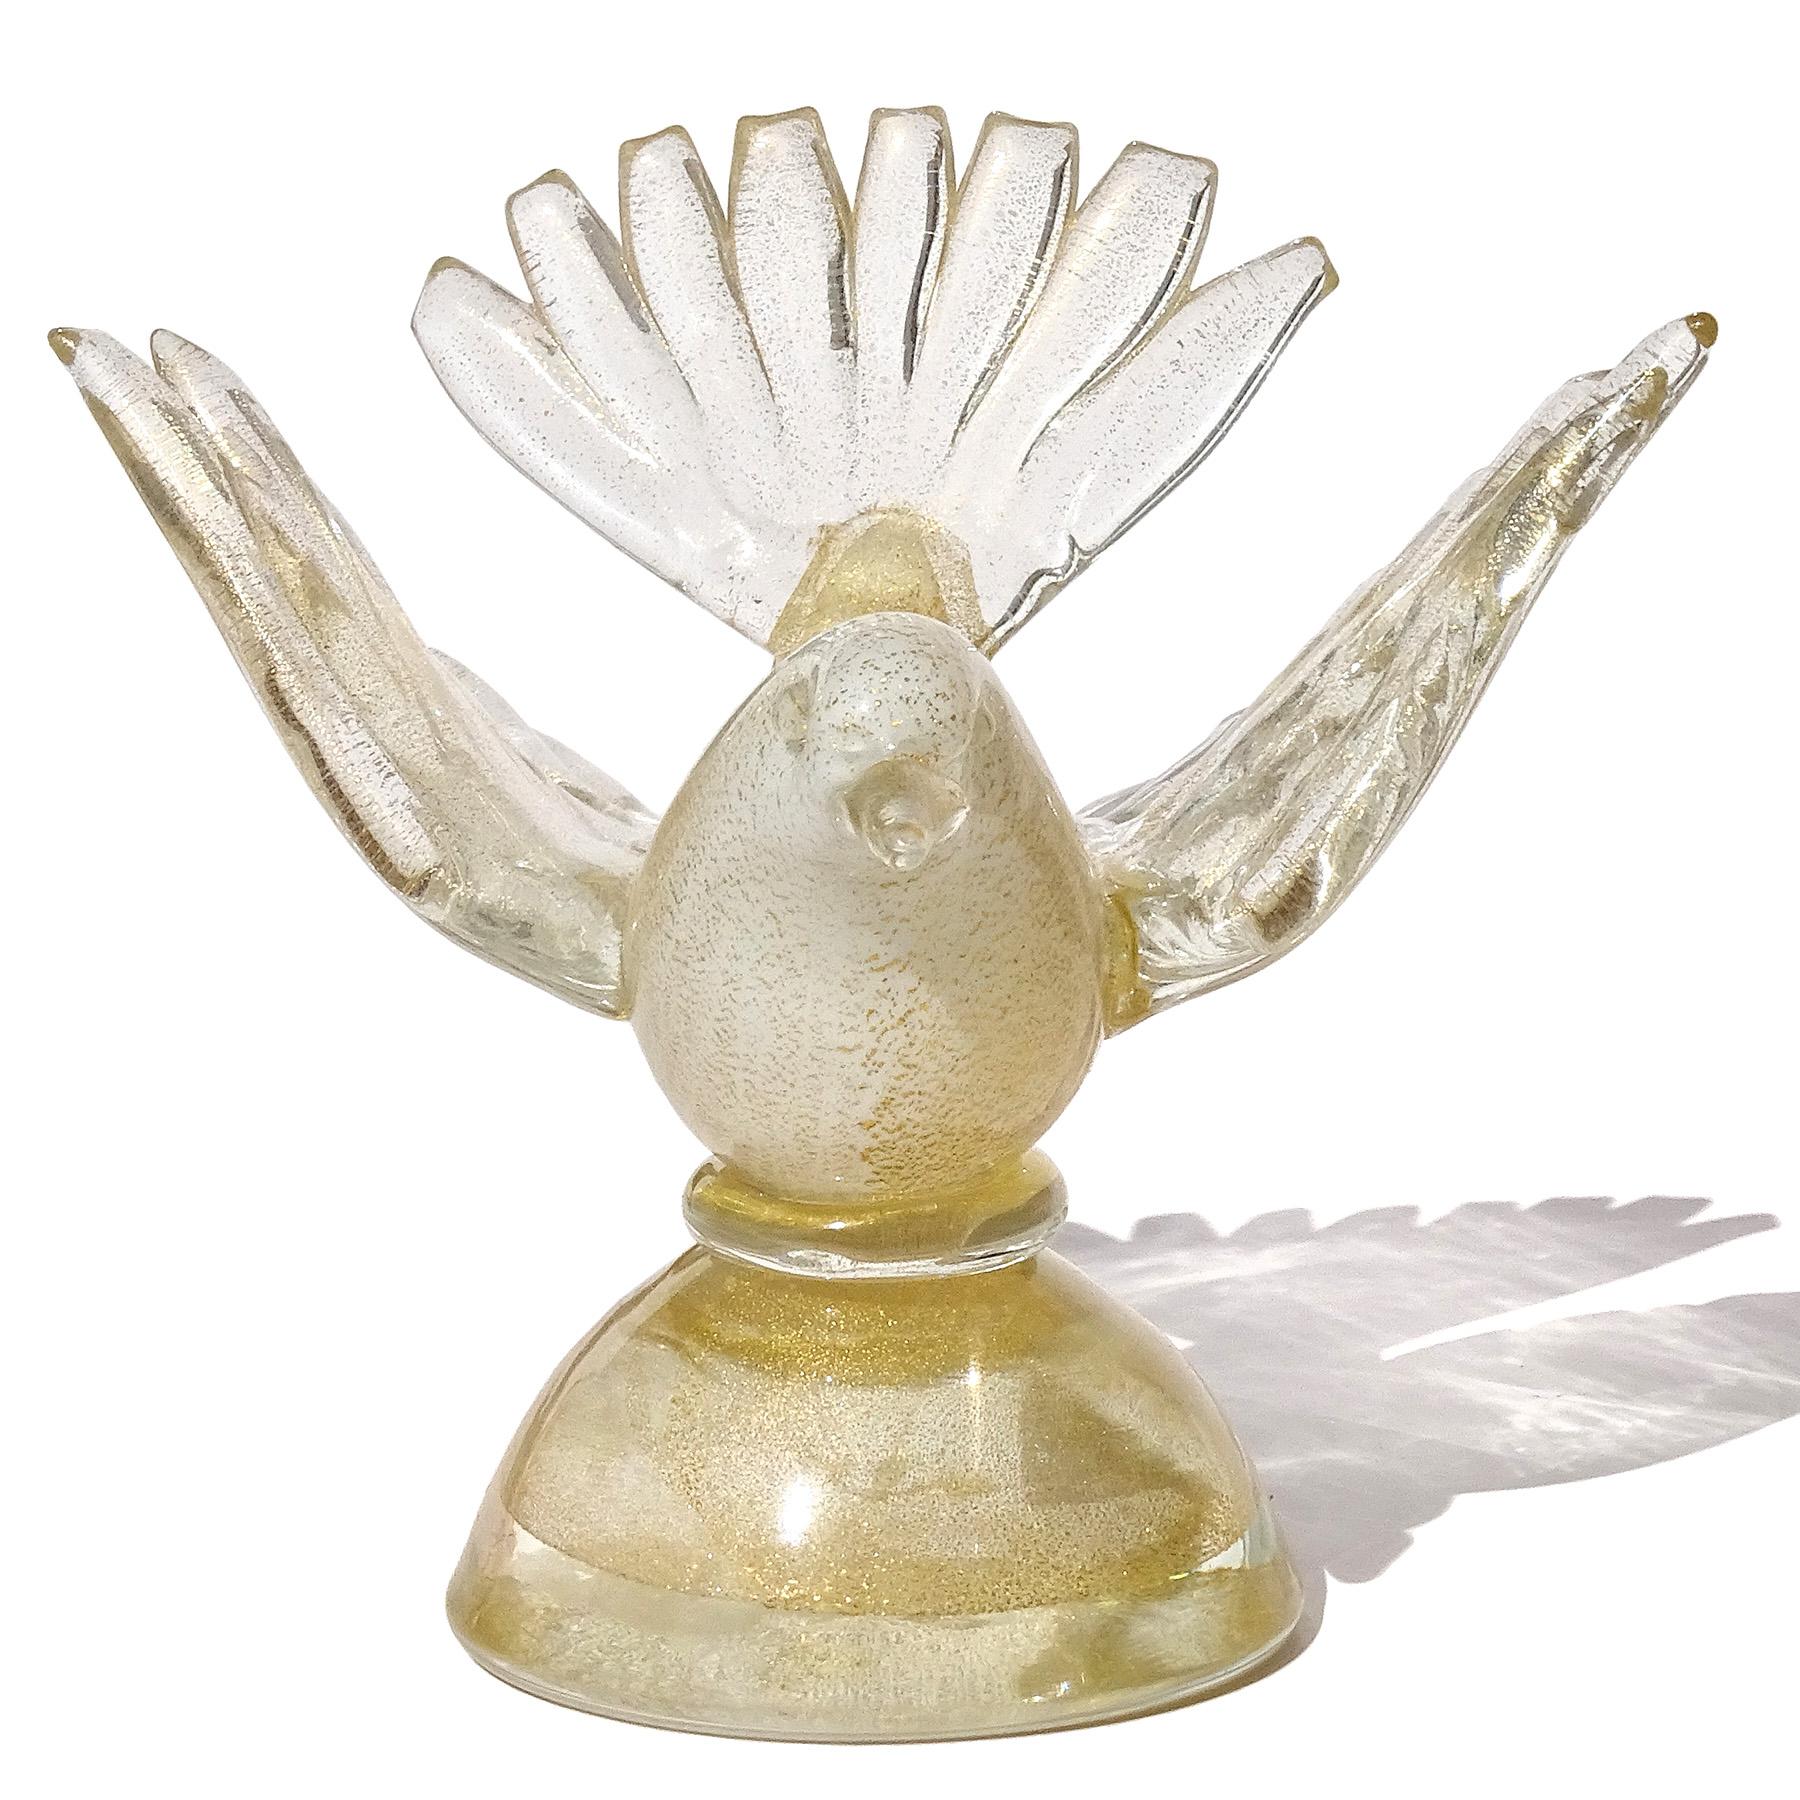 Beautiful vintage Murano hand blown white and gold flecks Italian art glass bird on base figurine, paperweight. Documented to designer Alfredo Barbini, circa 1950-60s. I have owned others like this with the Barbini labels, and similars are published